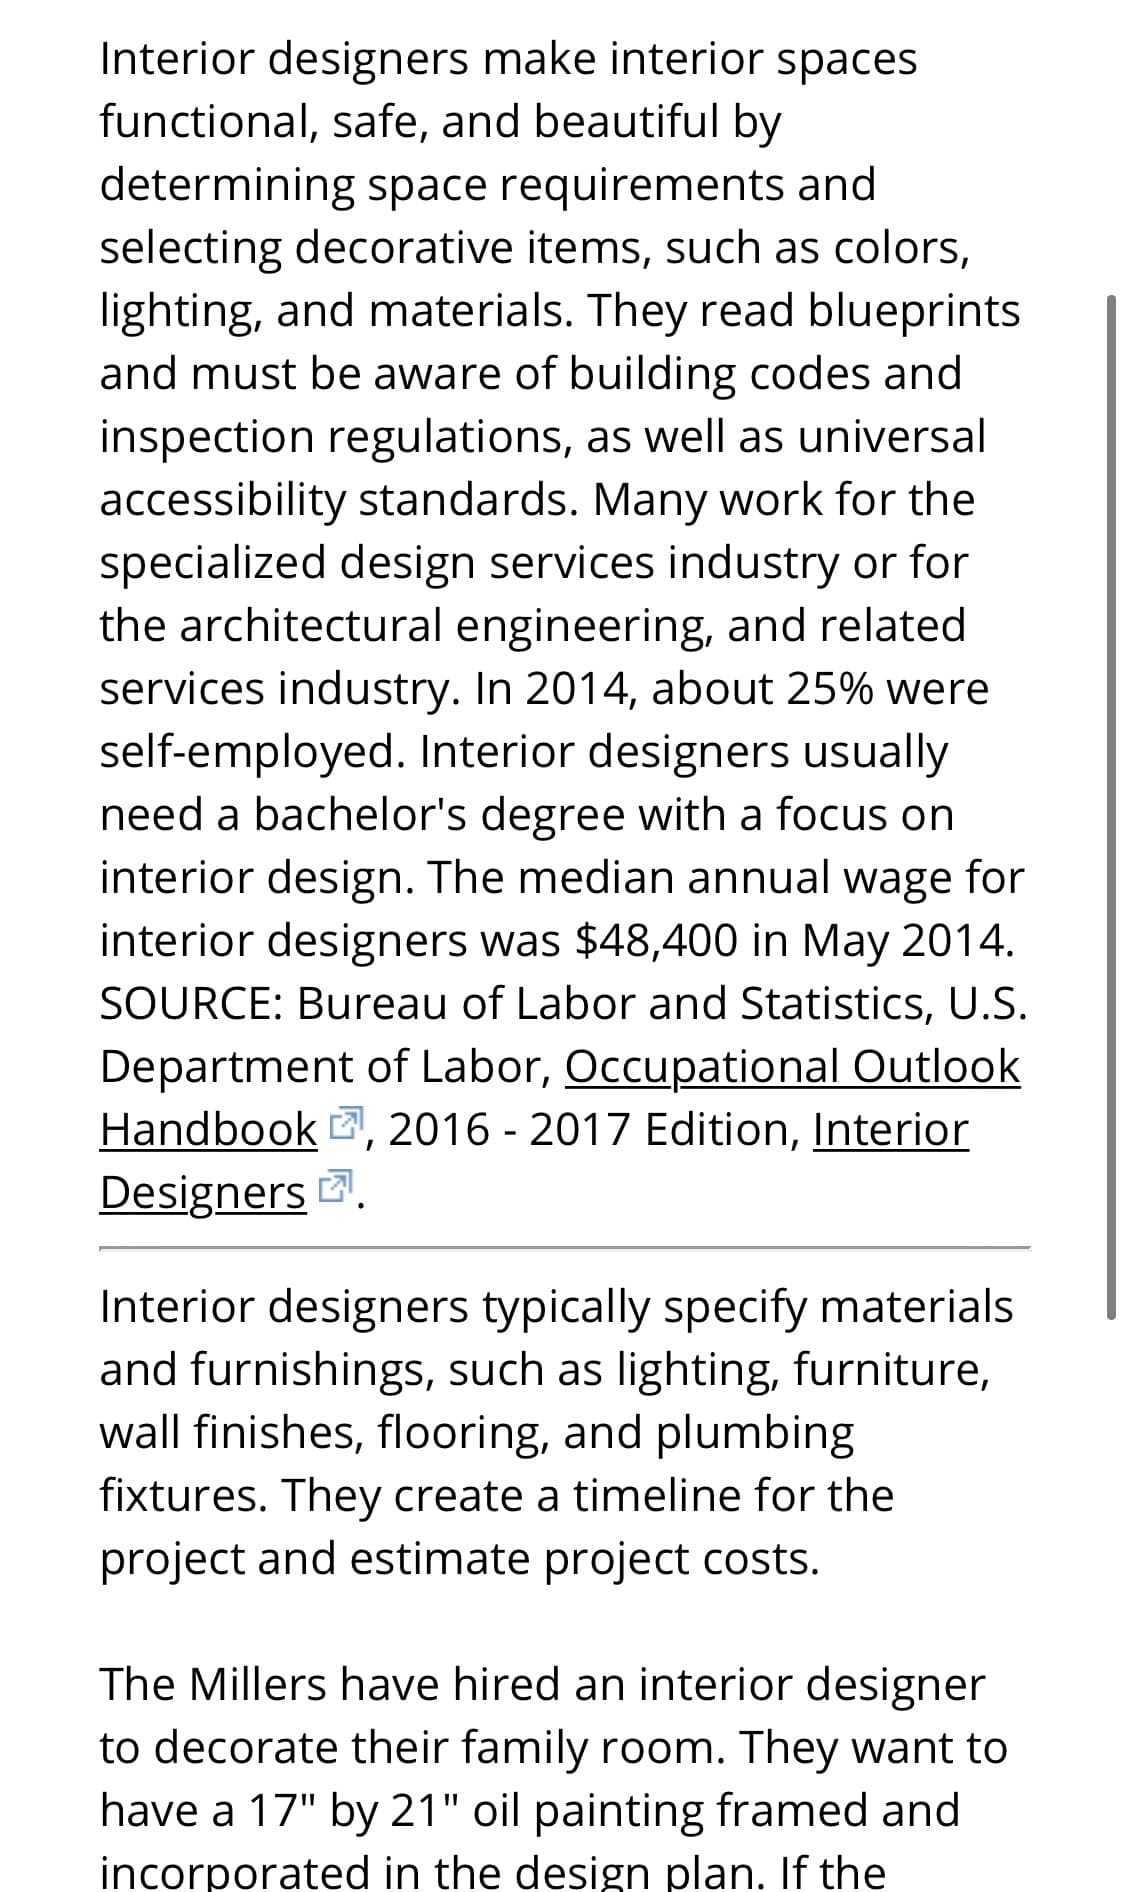 Interior designers make interior spaces
functional, safe, and beautiful by
determining space requirements and
selecting decorative items, such as colors,
lighting, and materials. They read blueprints
and must be aware of building codes and
inspection regulations, as well as universal
accessibility standards. Many work for the
specialized design services industry or for
the architectural engineering, and related
services industry. In 2014, about 25% were
self-employed. Interior designers usually
need a bachelor's degree with a focus on
interior design. The median annual wage for
interior designers was $48,400 in May 2014.
SOURCE: Bureau of Labor and Statistics, U.S.
Department of Labor, Occupational Outlook
Handbook , 2016 - 2017 Edition, Interior
Designers .
Interior designers typically specify materials
and furnishings, such as lighting, furniture,
wall finishes, flooring, and plumbing
fixtures. They create a timeline for the
project and estimate project costs.
The Millers have hired an interior designer
to decorate their family room. They want to
have a 17" by 21" oil painting framed and
incorporated in the design plan. If the
